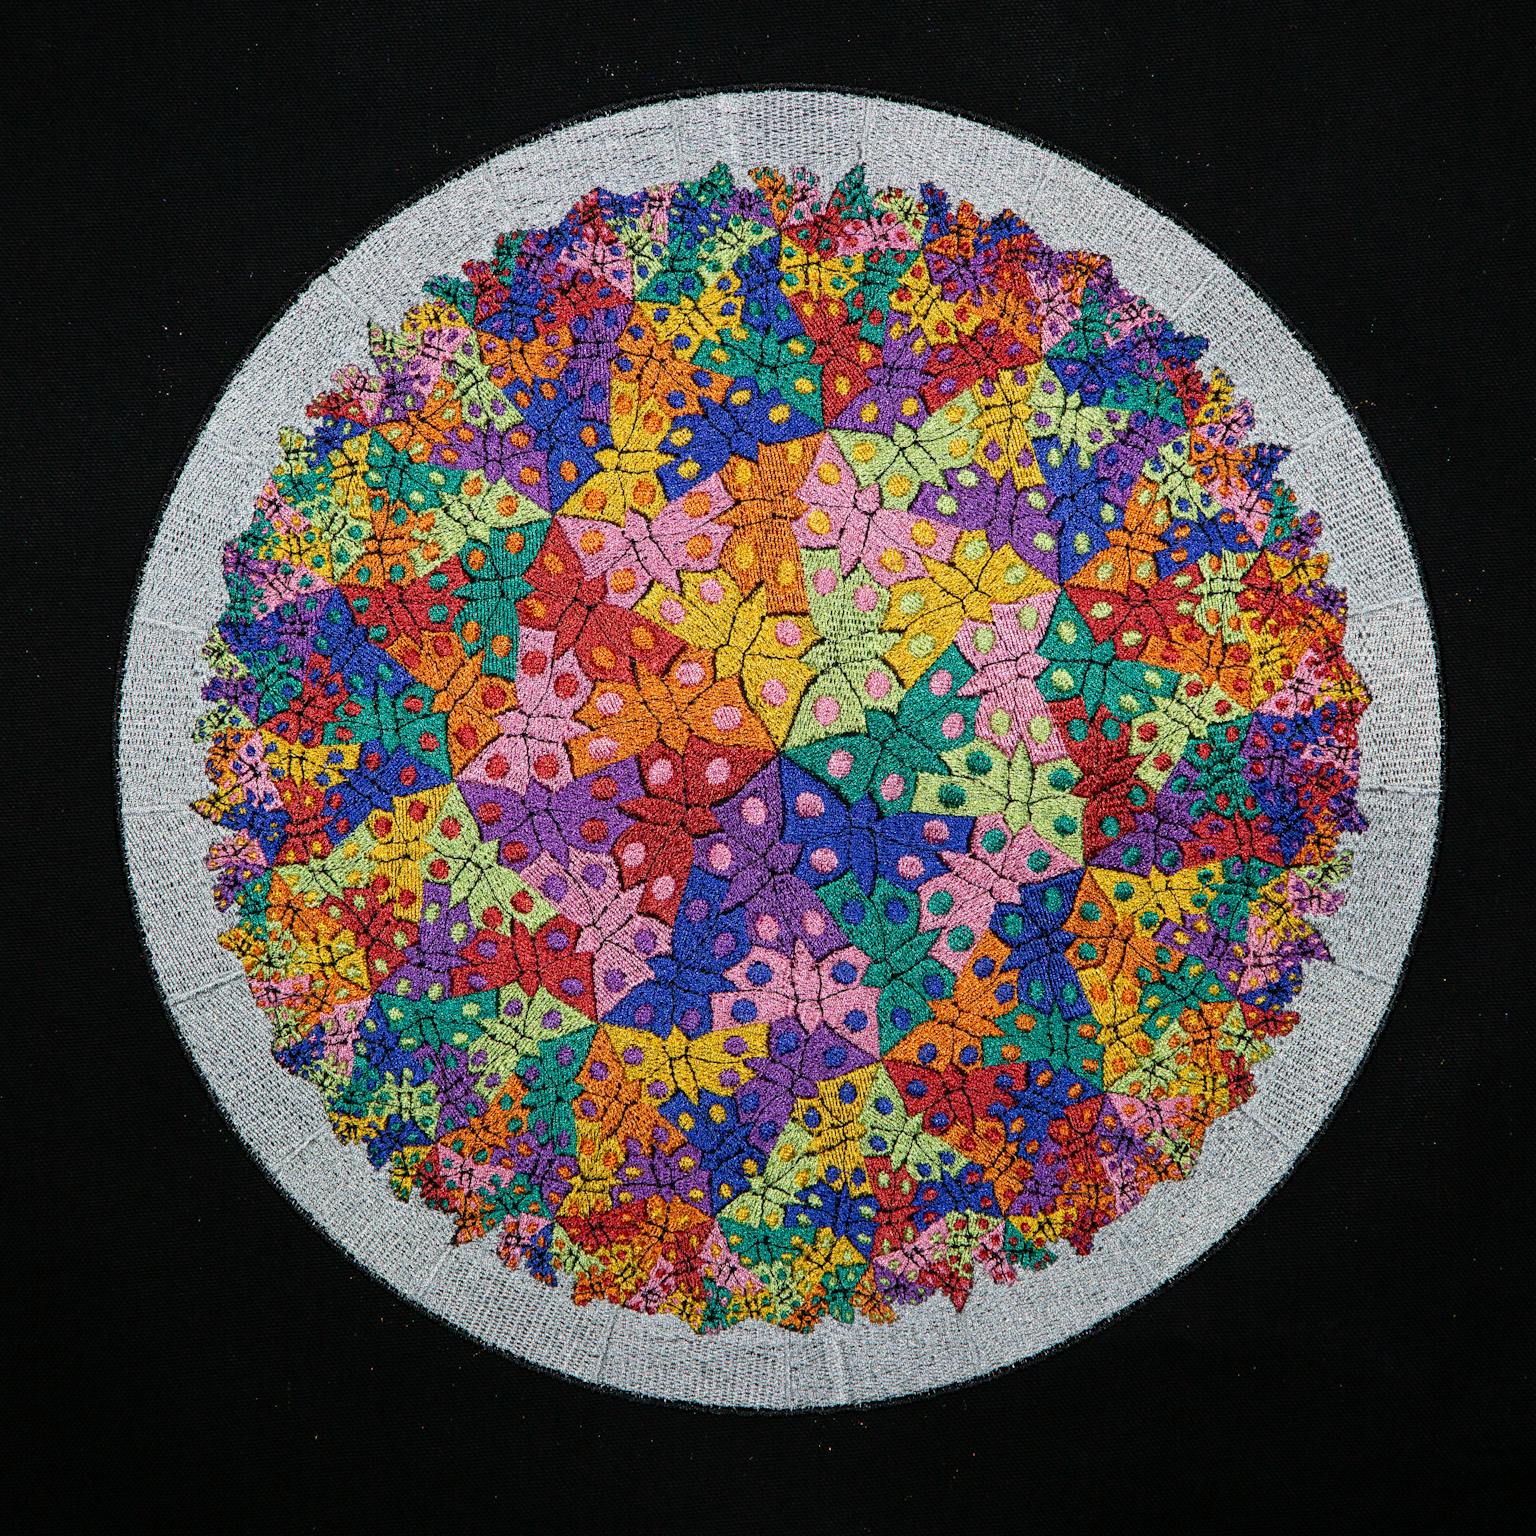 Image for entry 'Hyperbolic Embroidered Butterflies'